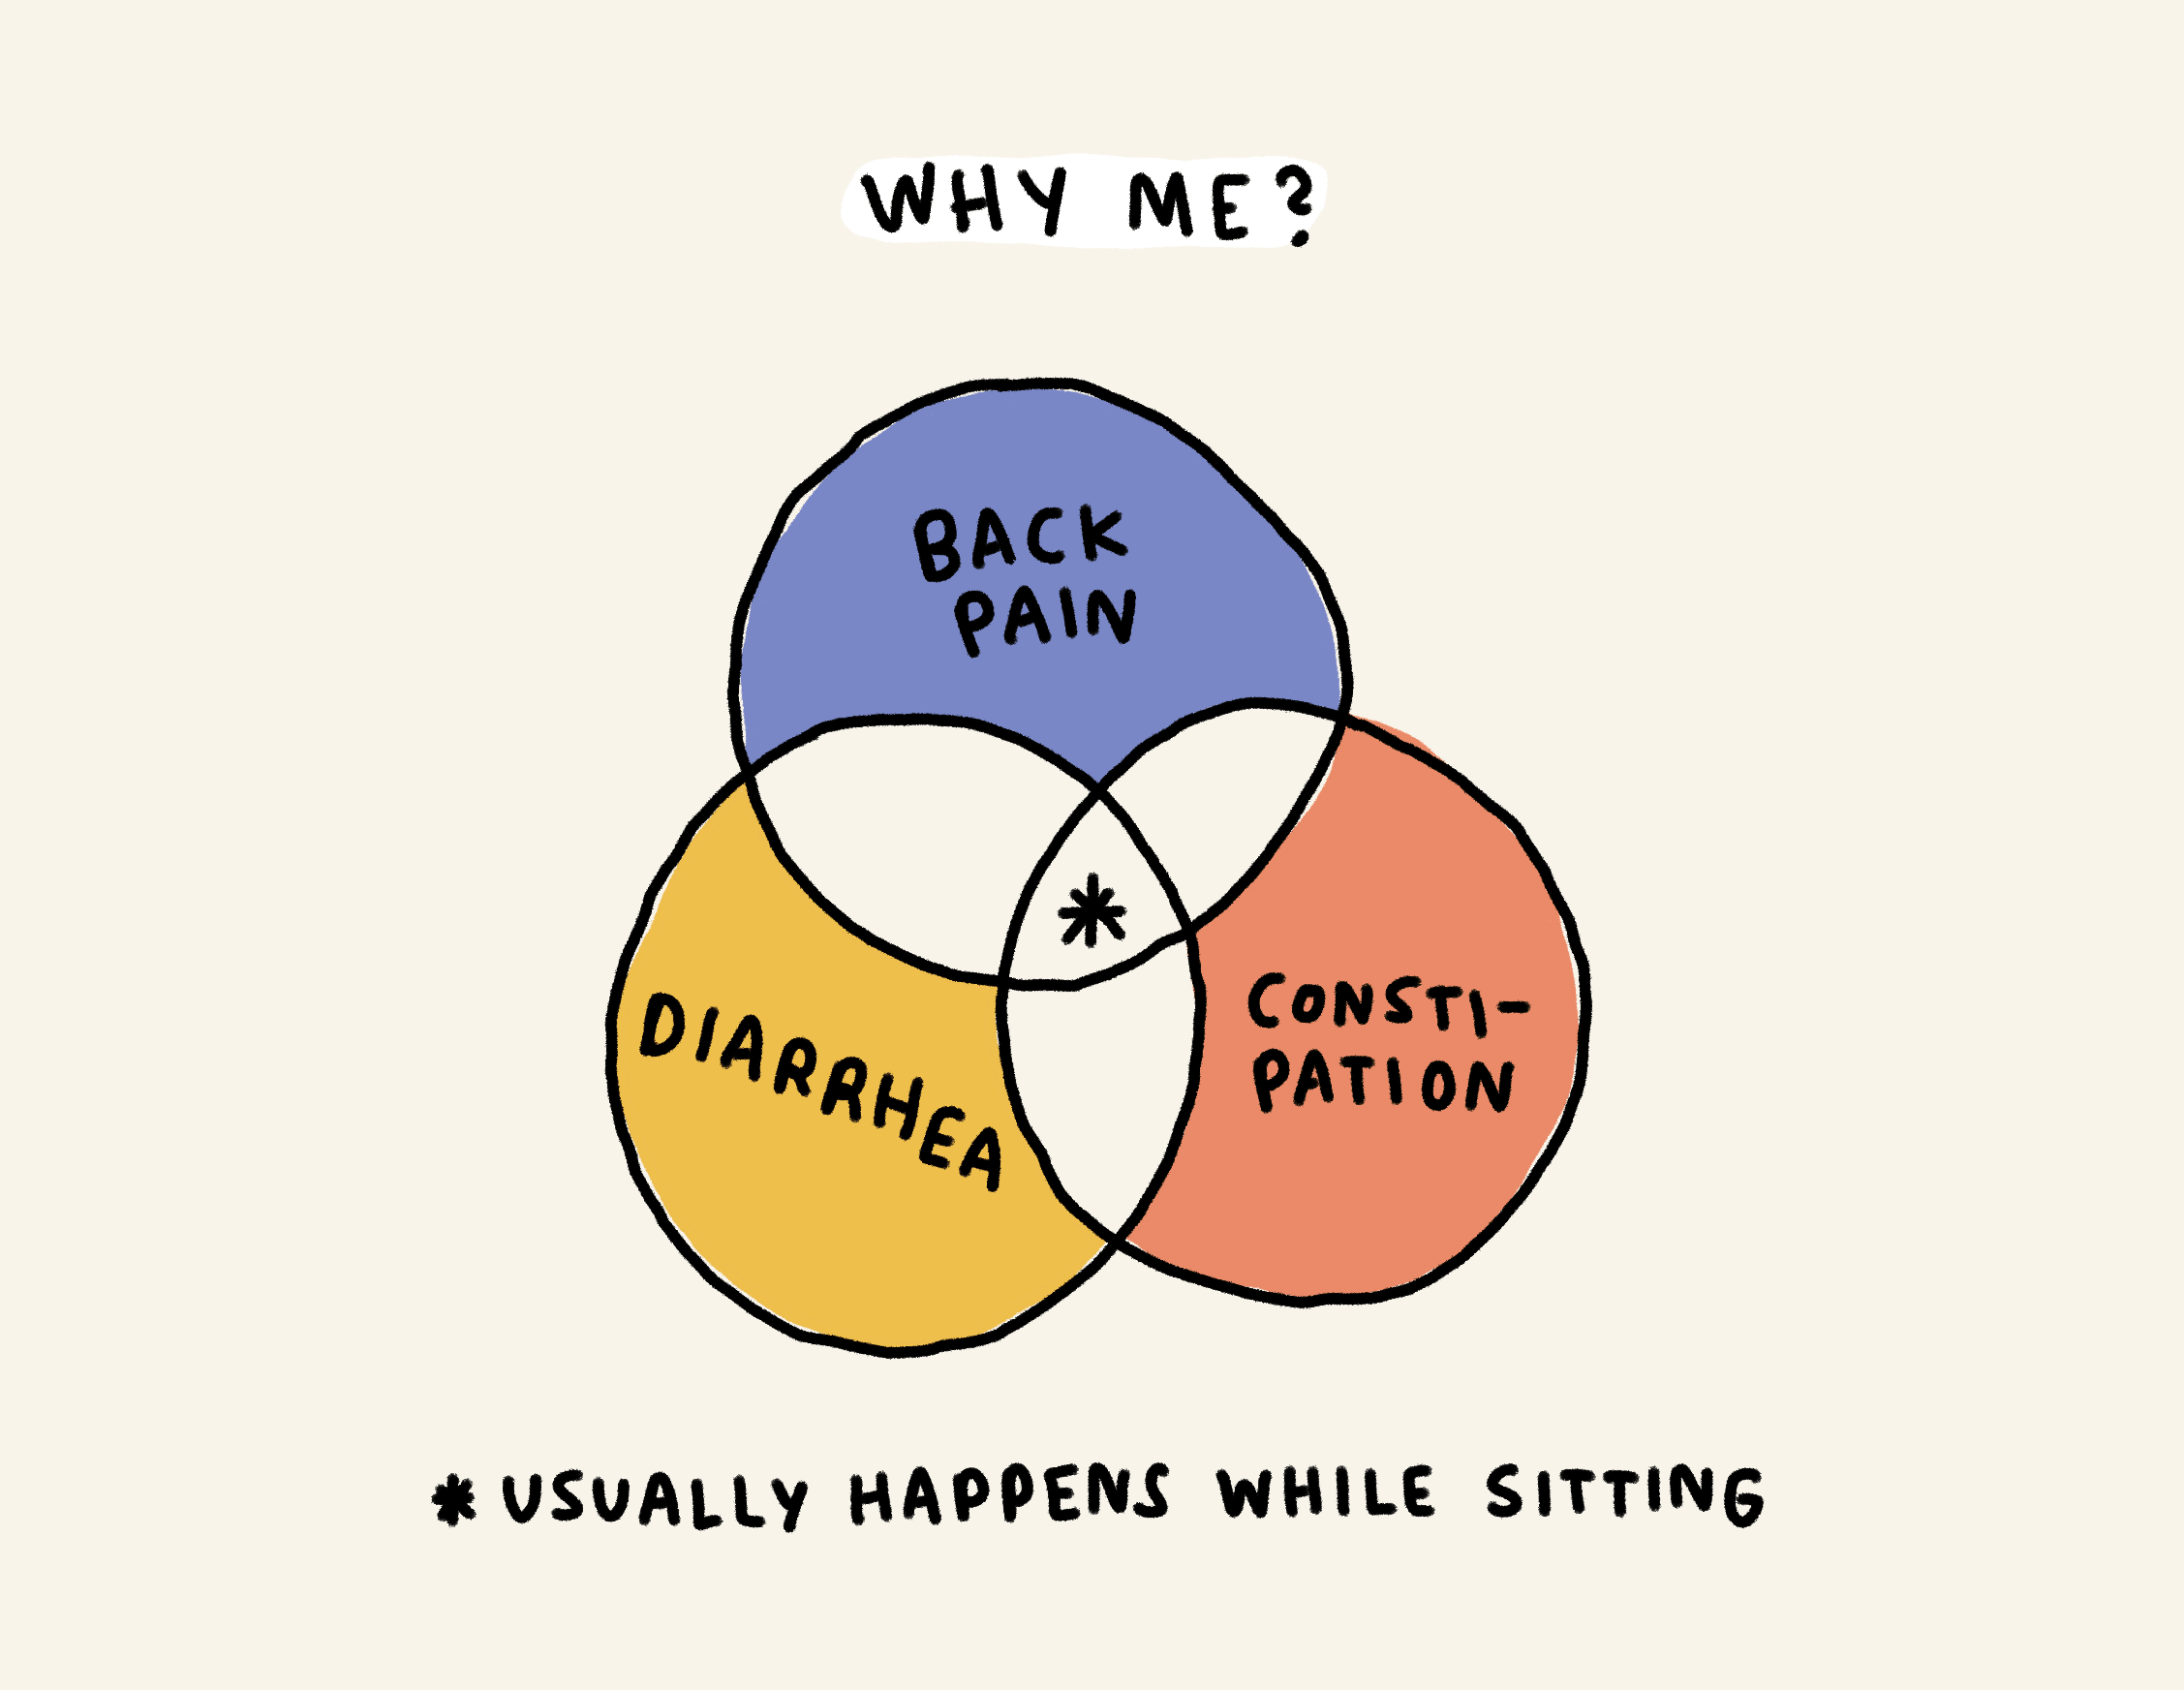 Why me?

Back pain + diarrhea + constipation = usually happens while sitting